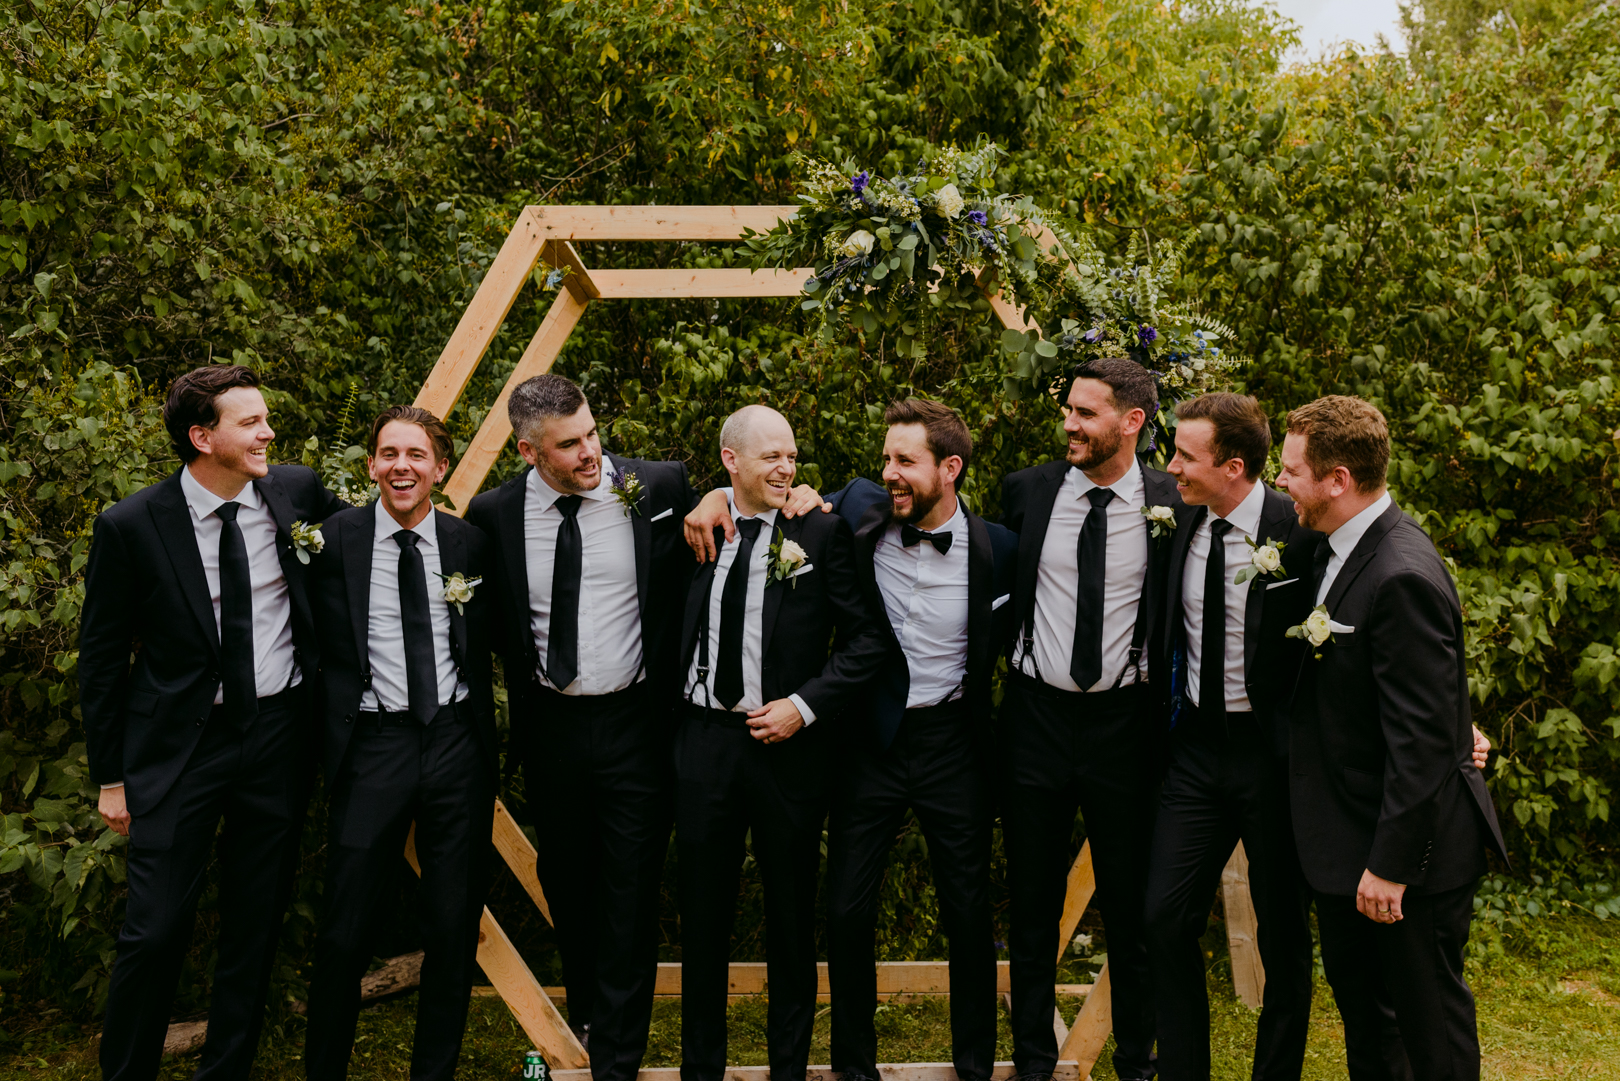 groom and groomsmen laughing together in front of wooden hexagon